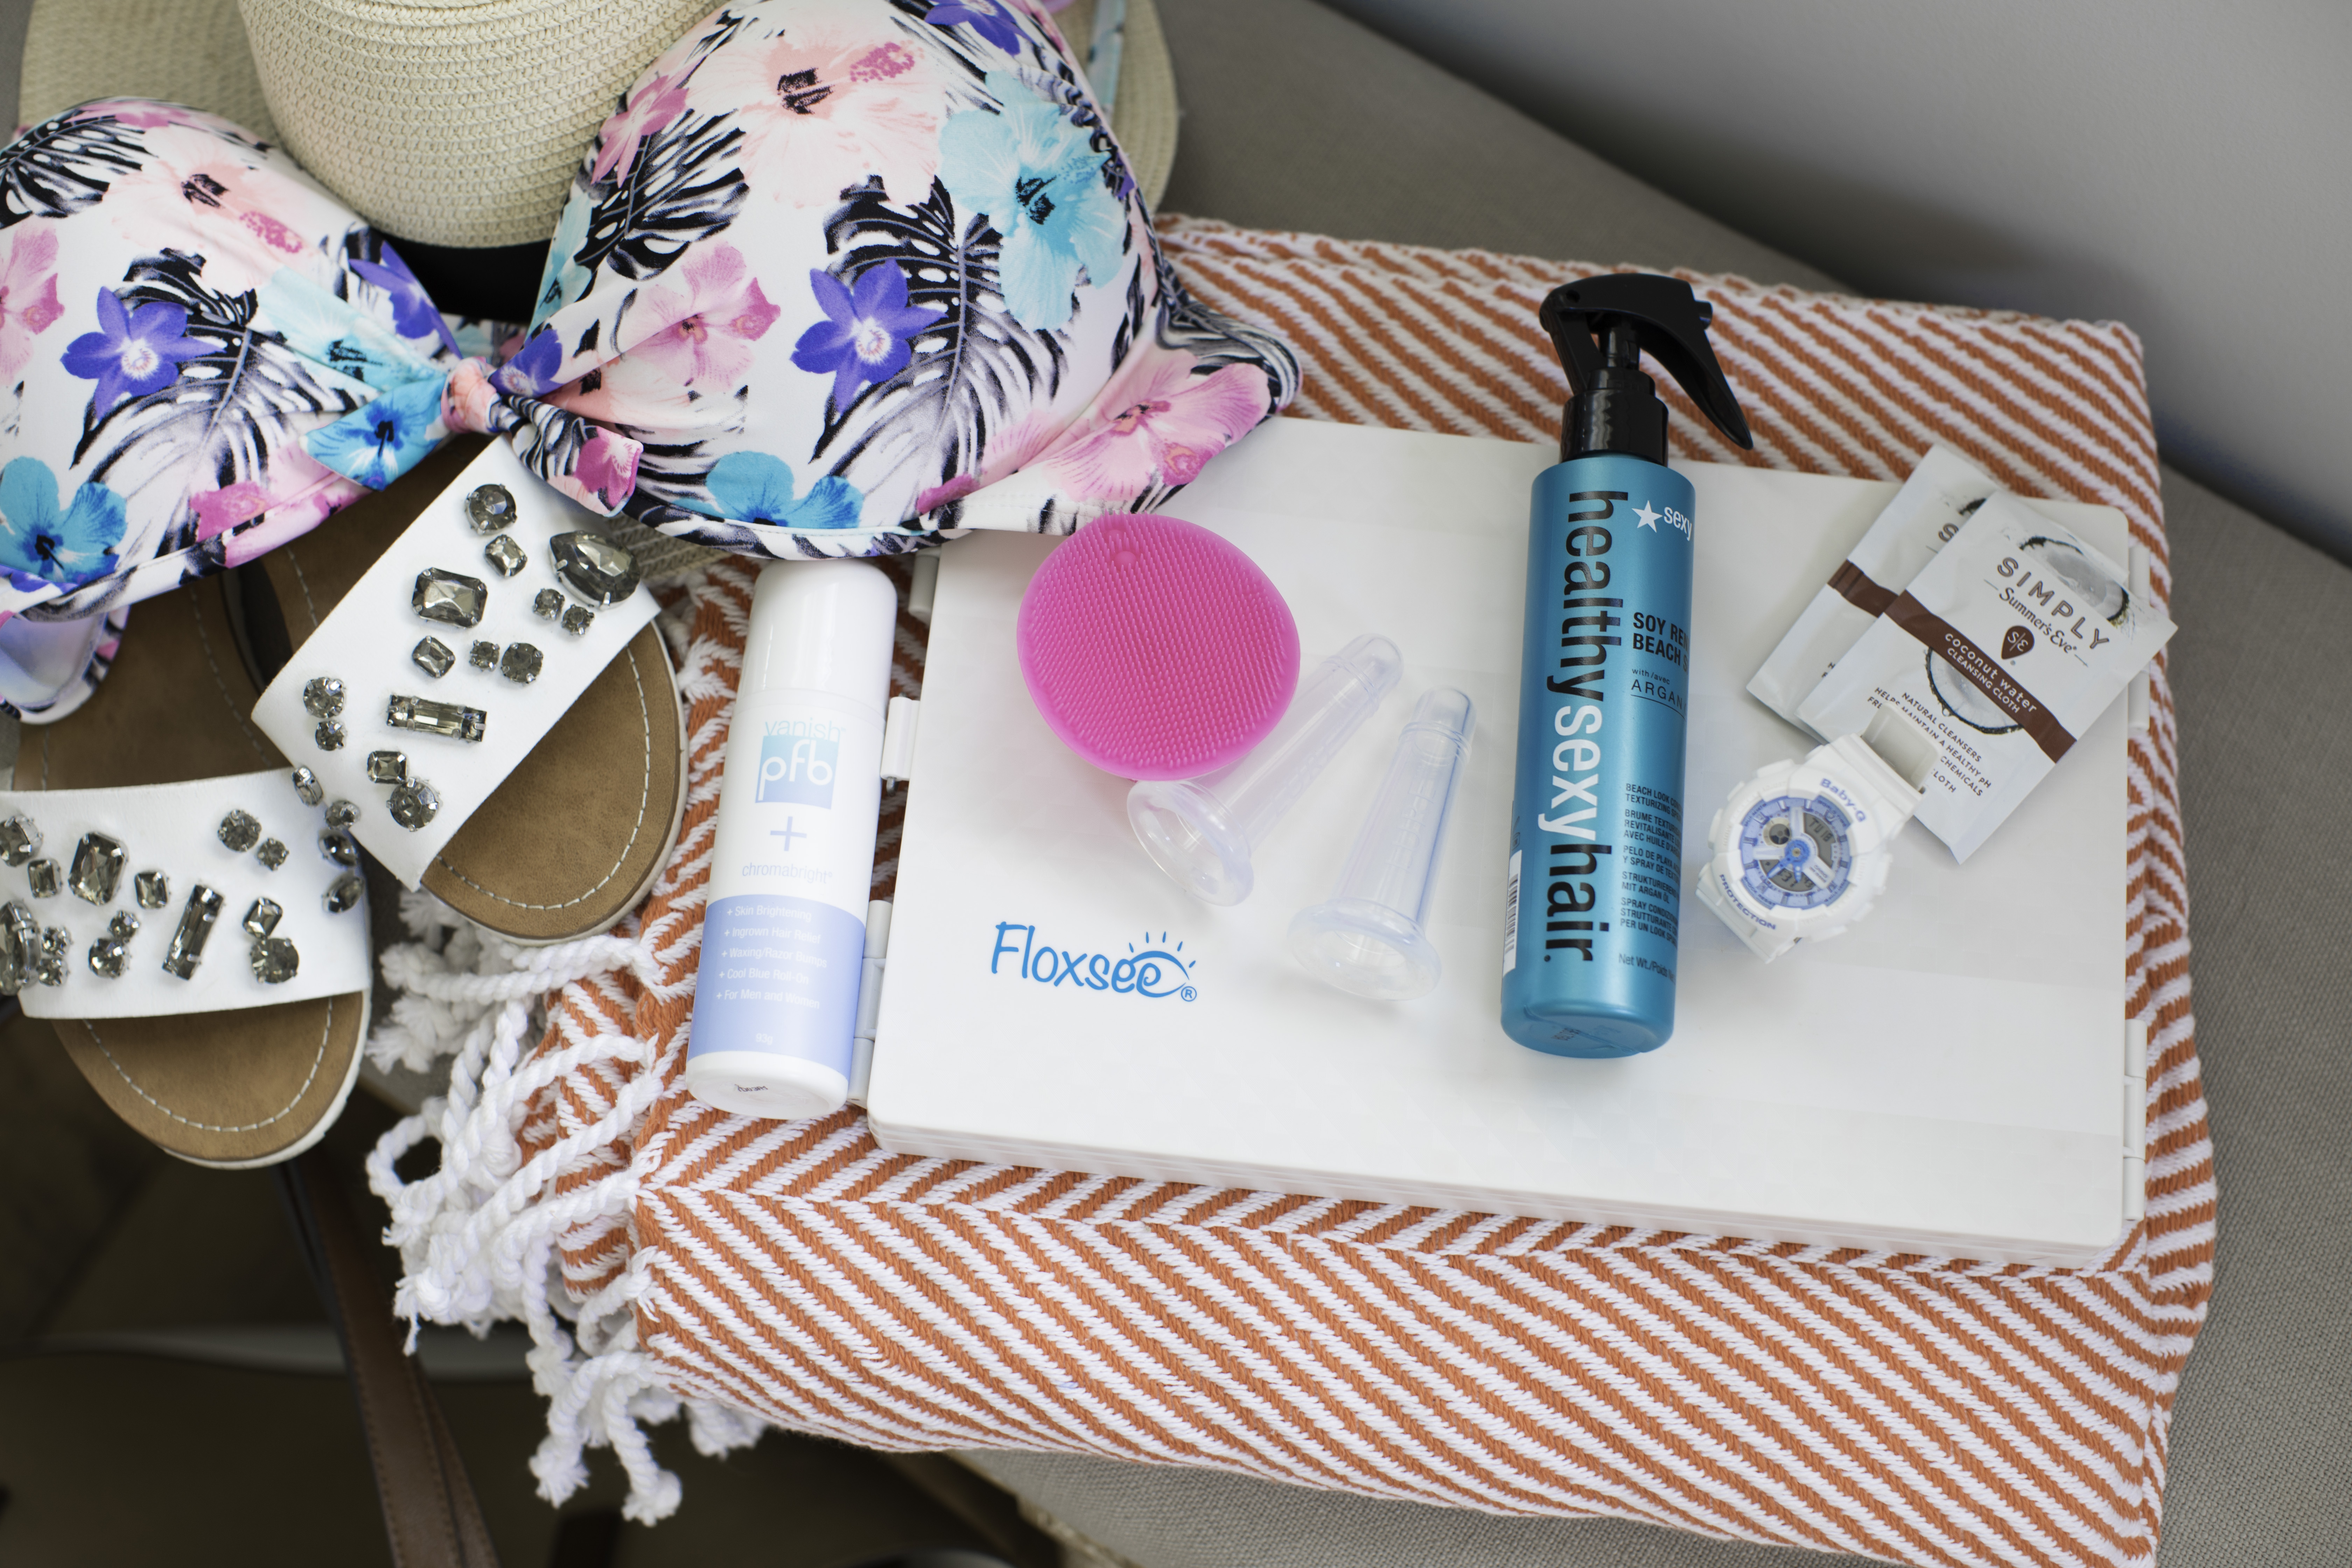 what to pack for a beach vacation, babbleboxx, #ad